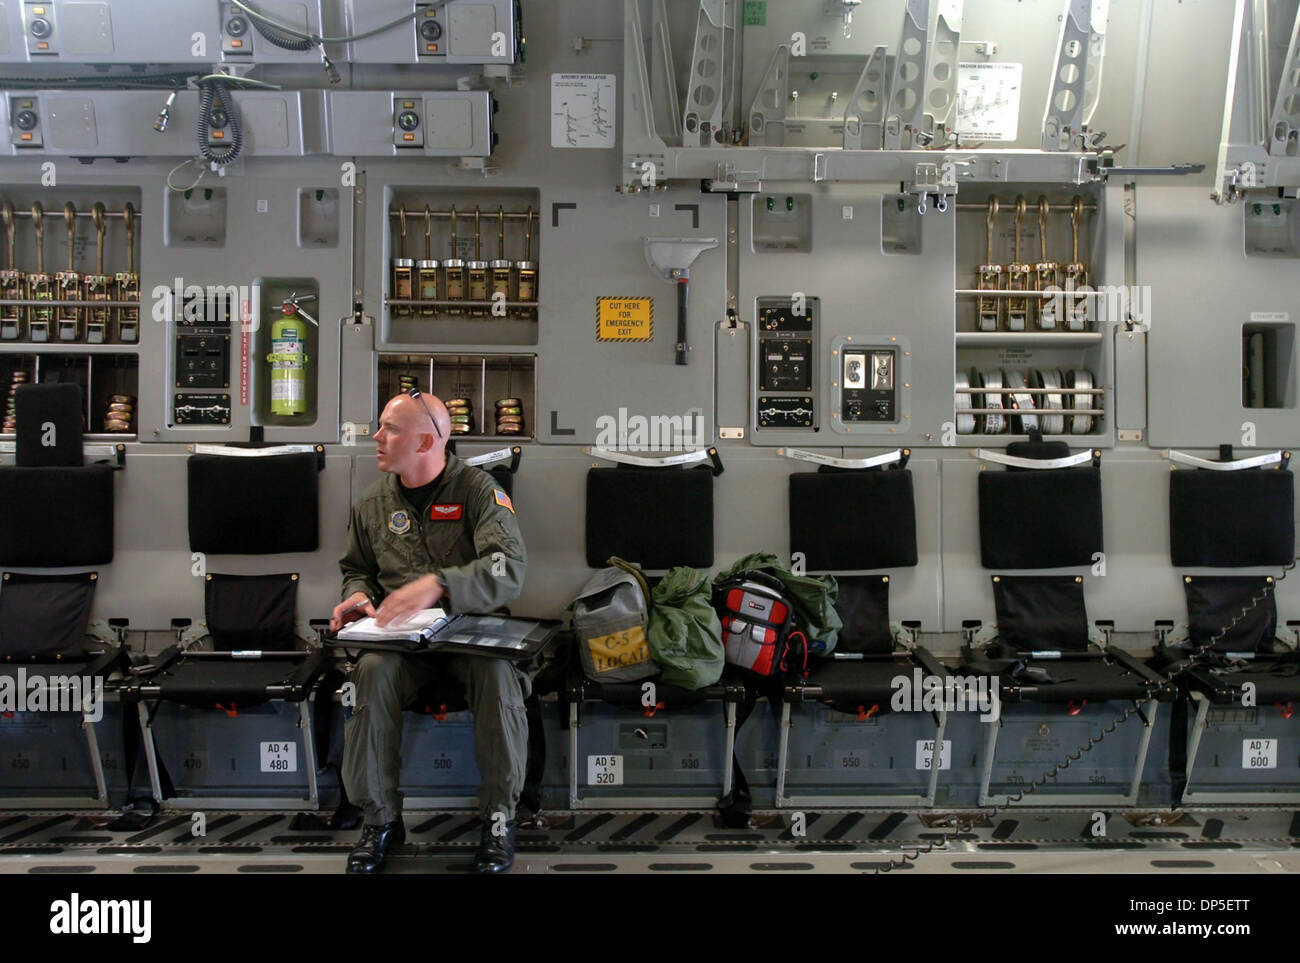 Sep 13, 2006; Fairfield, CA, USA; United States Air Force Captain Dave Weber finishes paperwork after a training exercise aboard a C-17 Globemaster III cargo plane stationed at Travis Air Force Base in Fairfield, Calif. Wednesday, September 13, 2006. Mandatory Credit: Photo by Kristopher Skinner/Contra Costa Times/ZUMA Press. (©) Copyright 2006 by Contra Costa Times Stock Photo